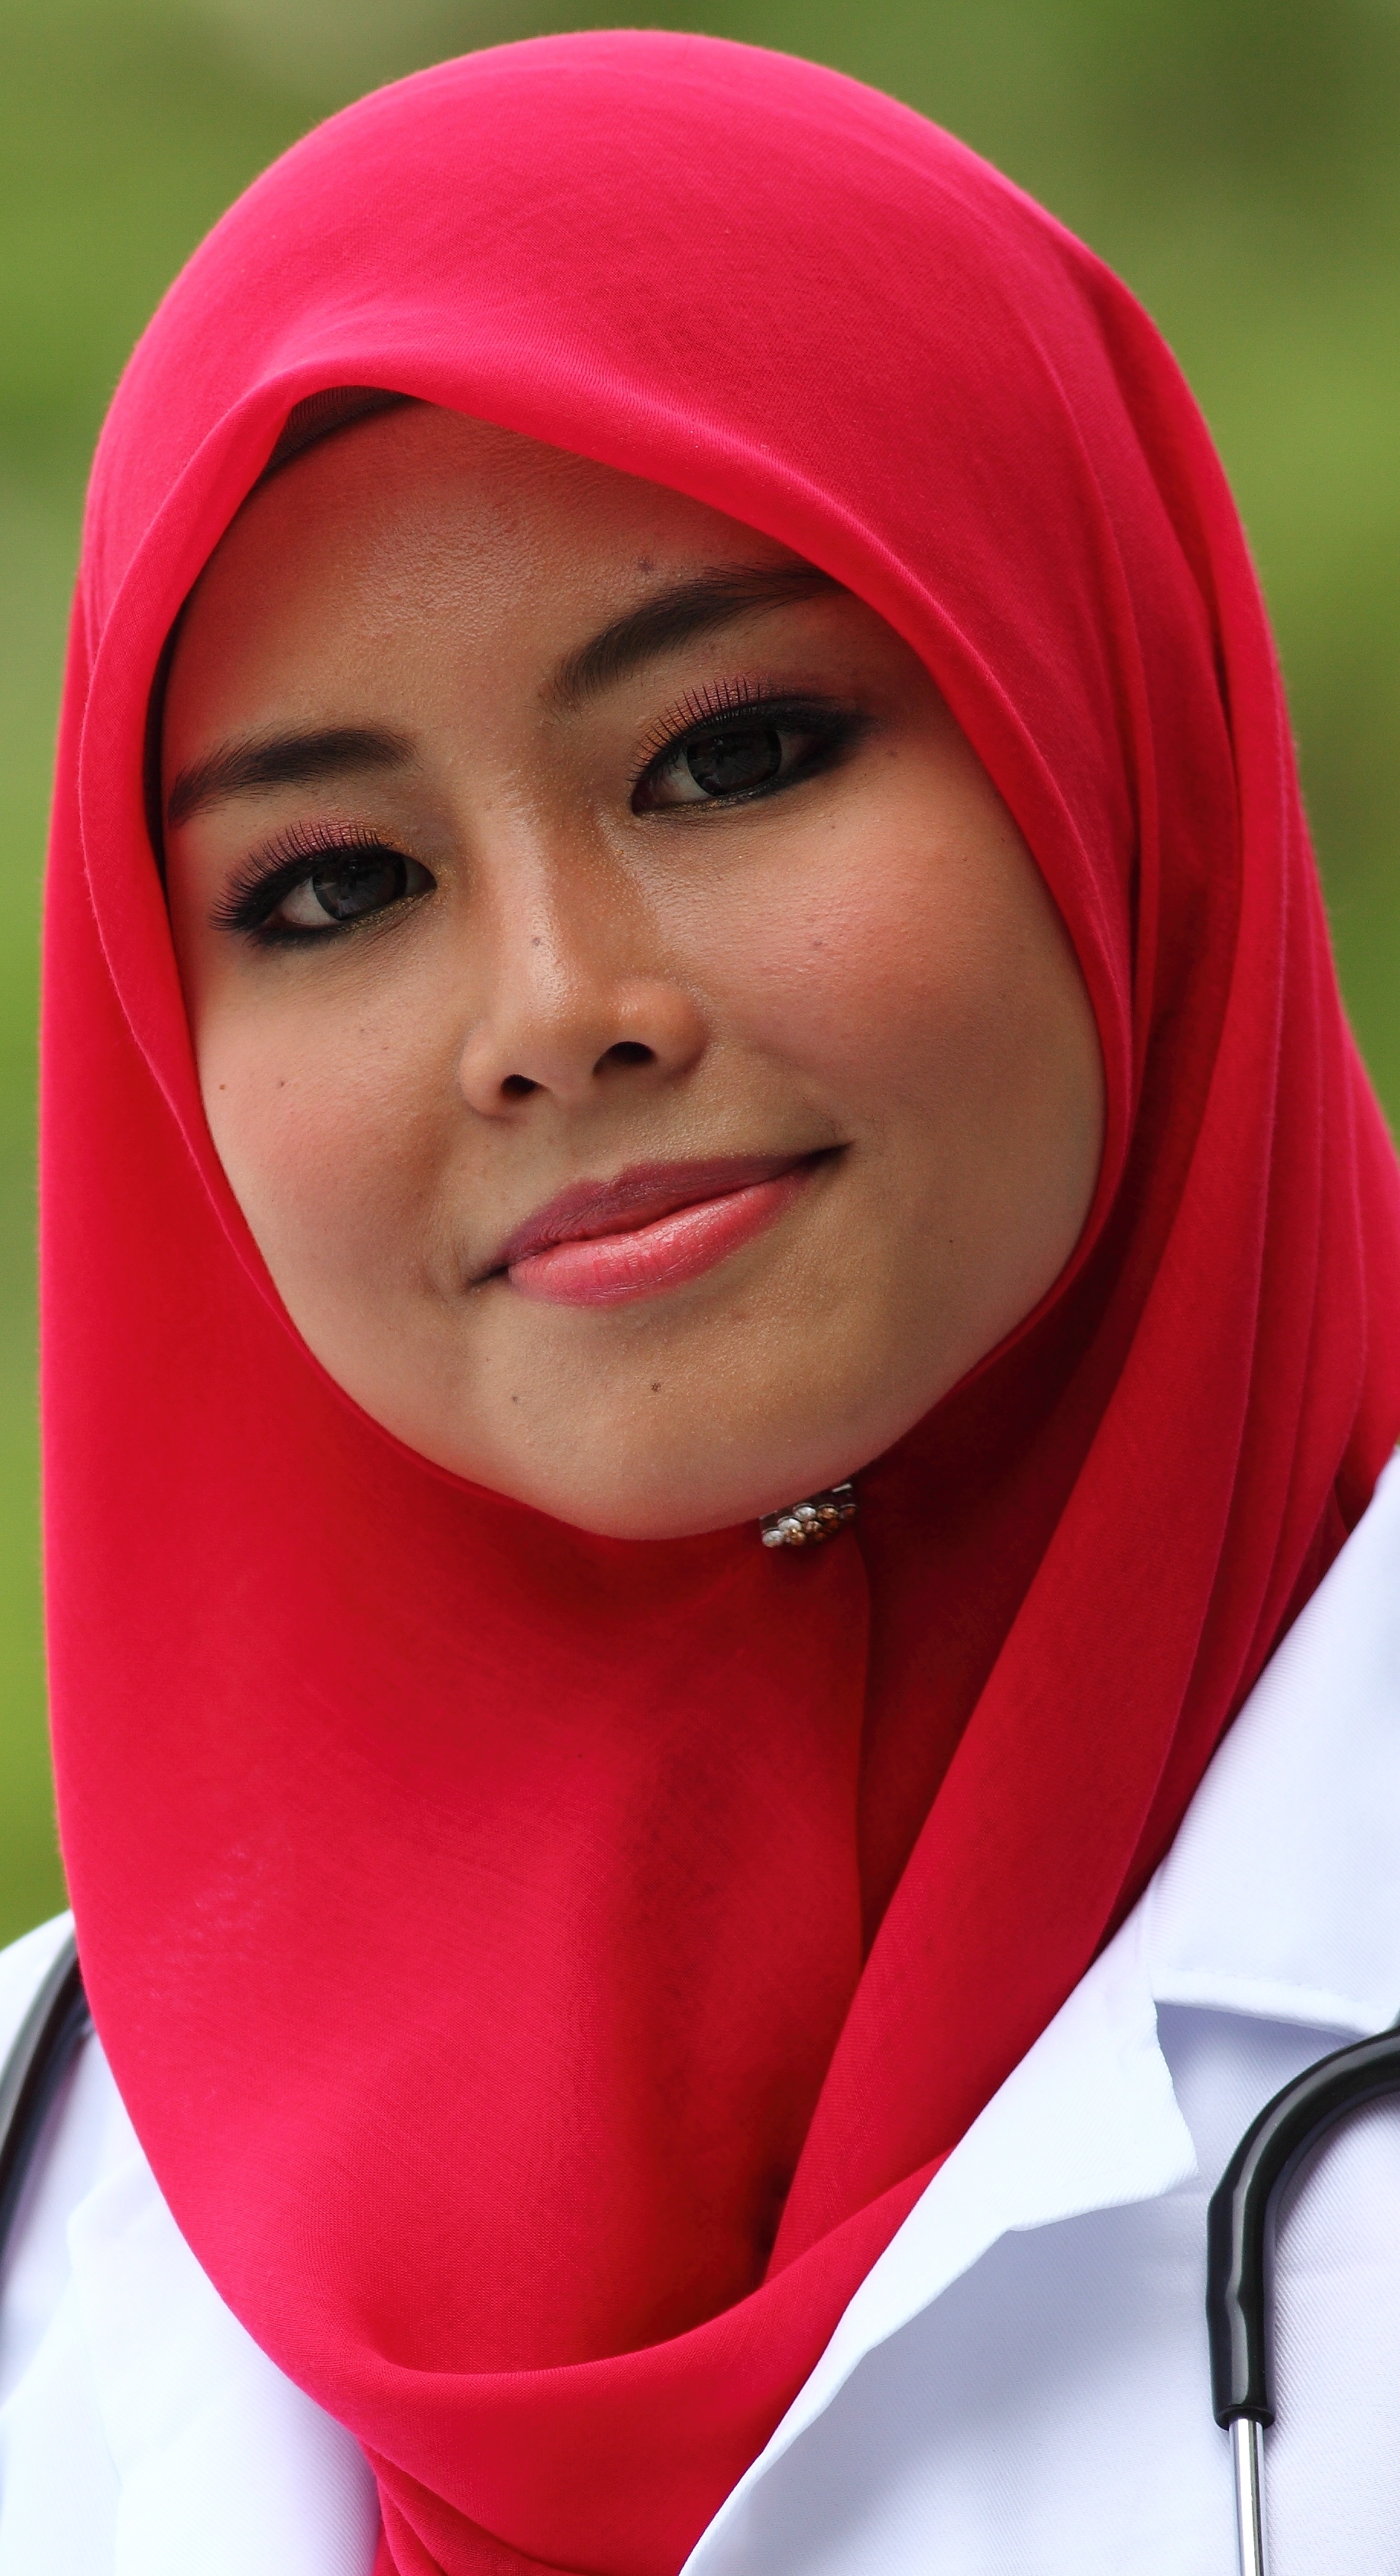 Free Photo Malaysia Girl Beauty Independent Smart Free Download Jooinn 